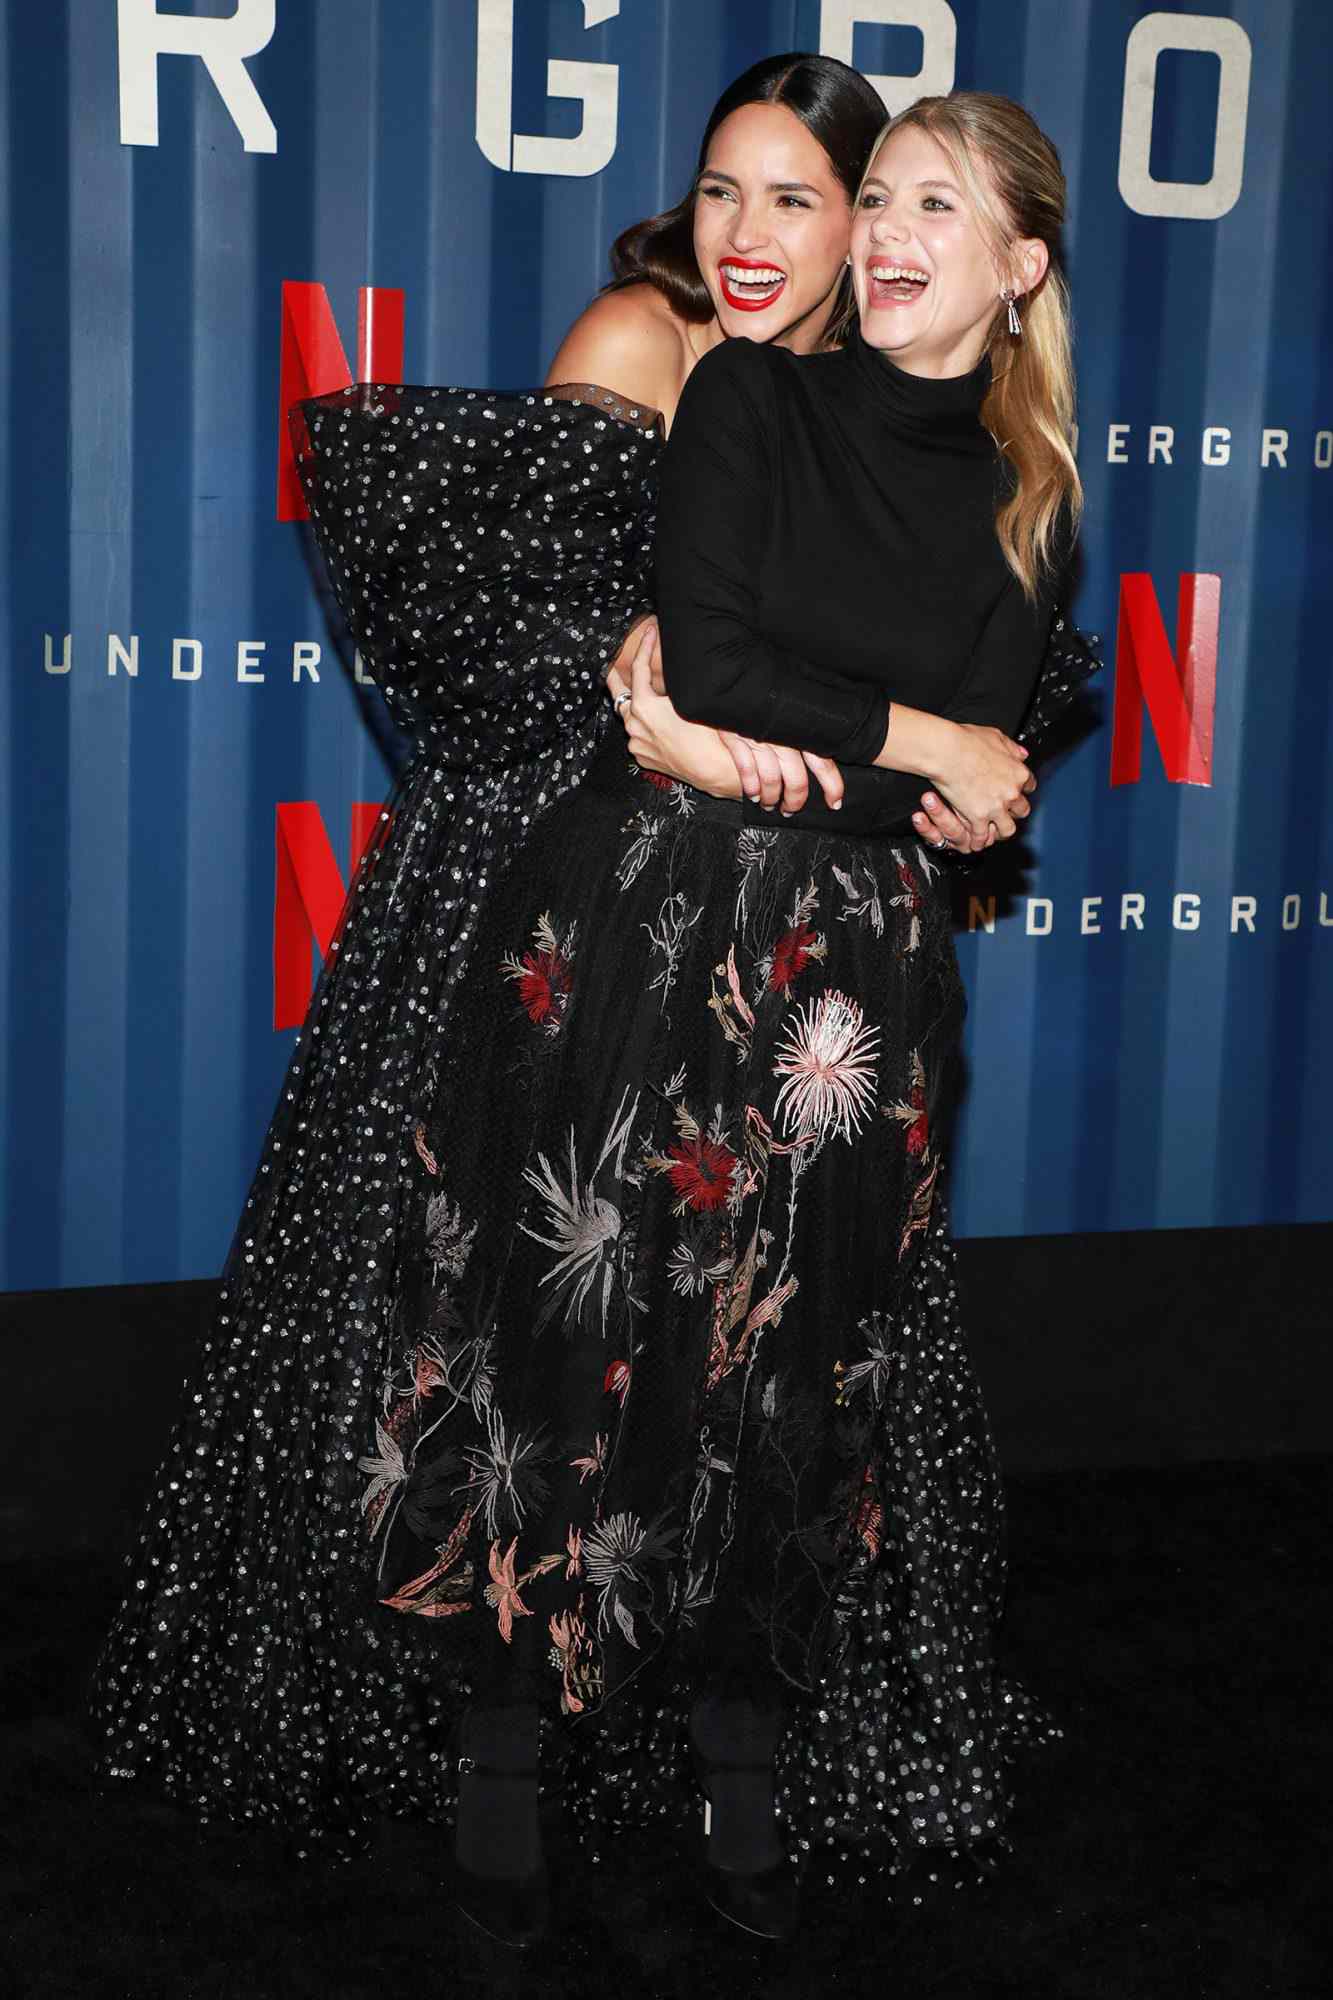 Melanie Laurent and Adria Arjona attend Netflix's "6 Underground" New York Premiere at The Shed on December 10, 2019 in New York City